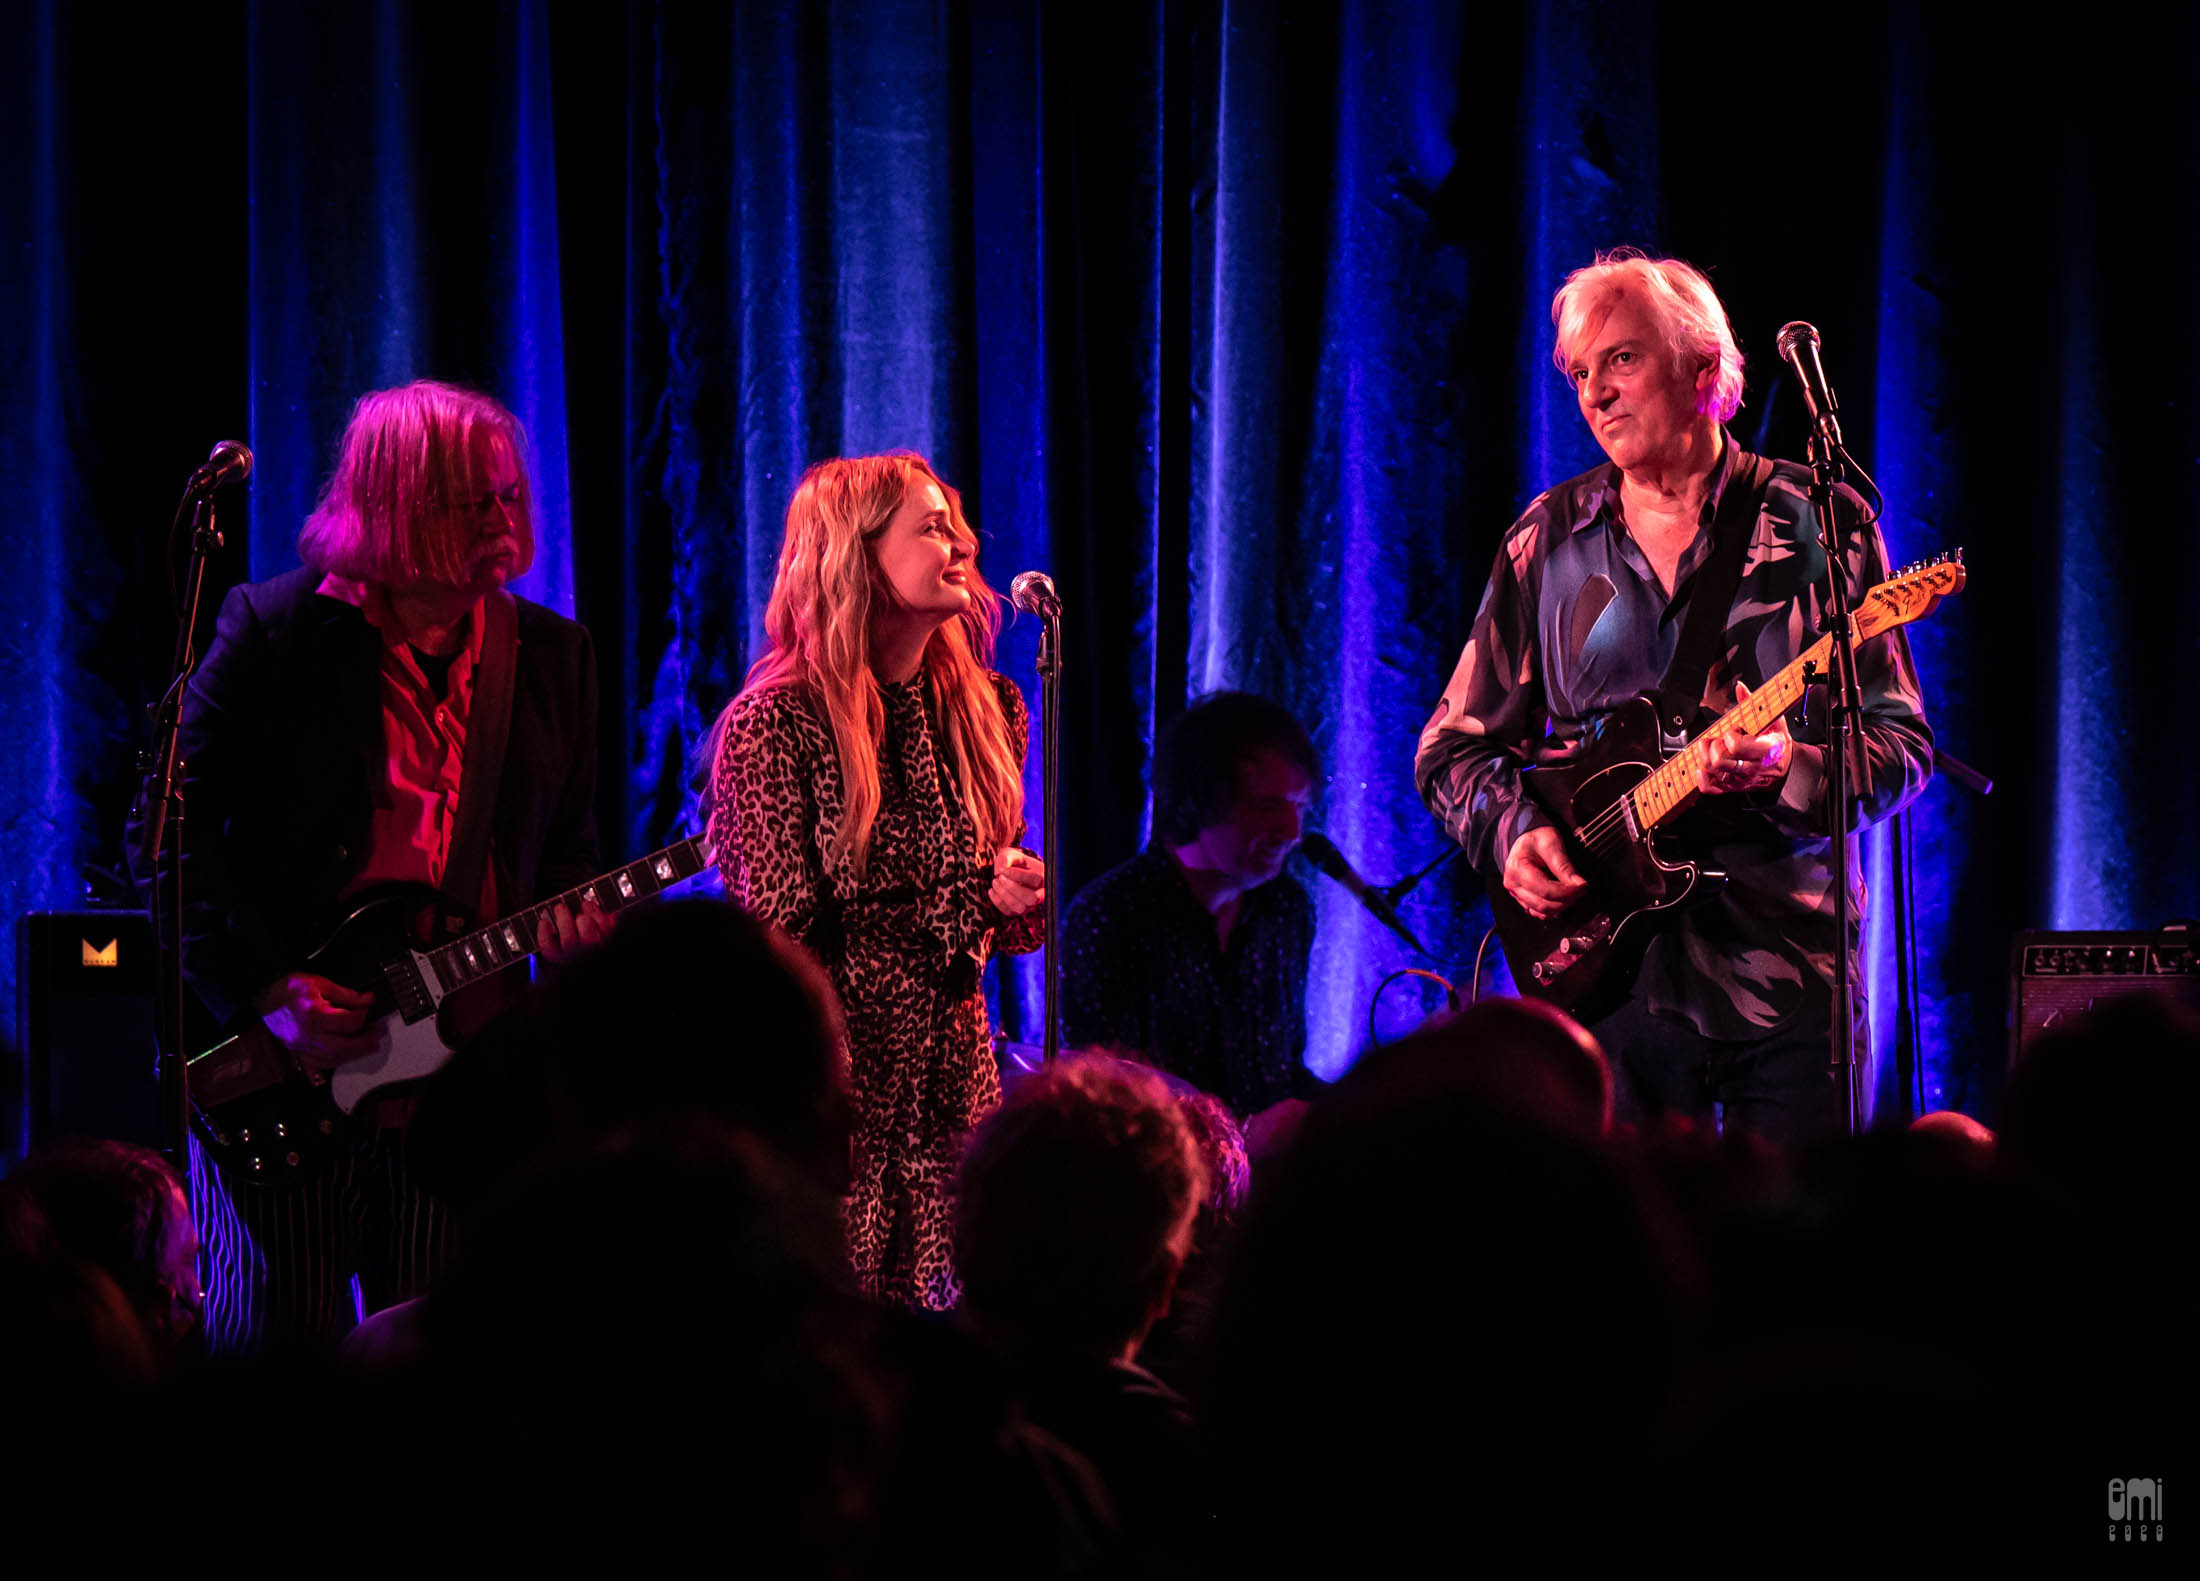 2023.3.21 Robyn Hitchcock with Emma Swift, Kurt Bloch, Kelley Stoltz, and Bart Davenport at The Chapel SF CA. photo by emi